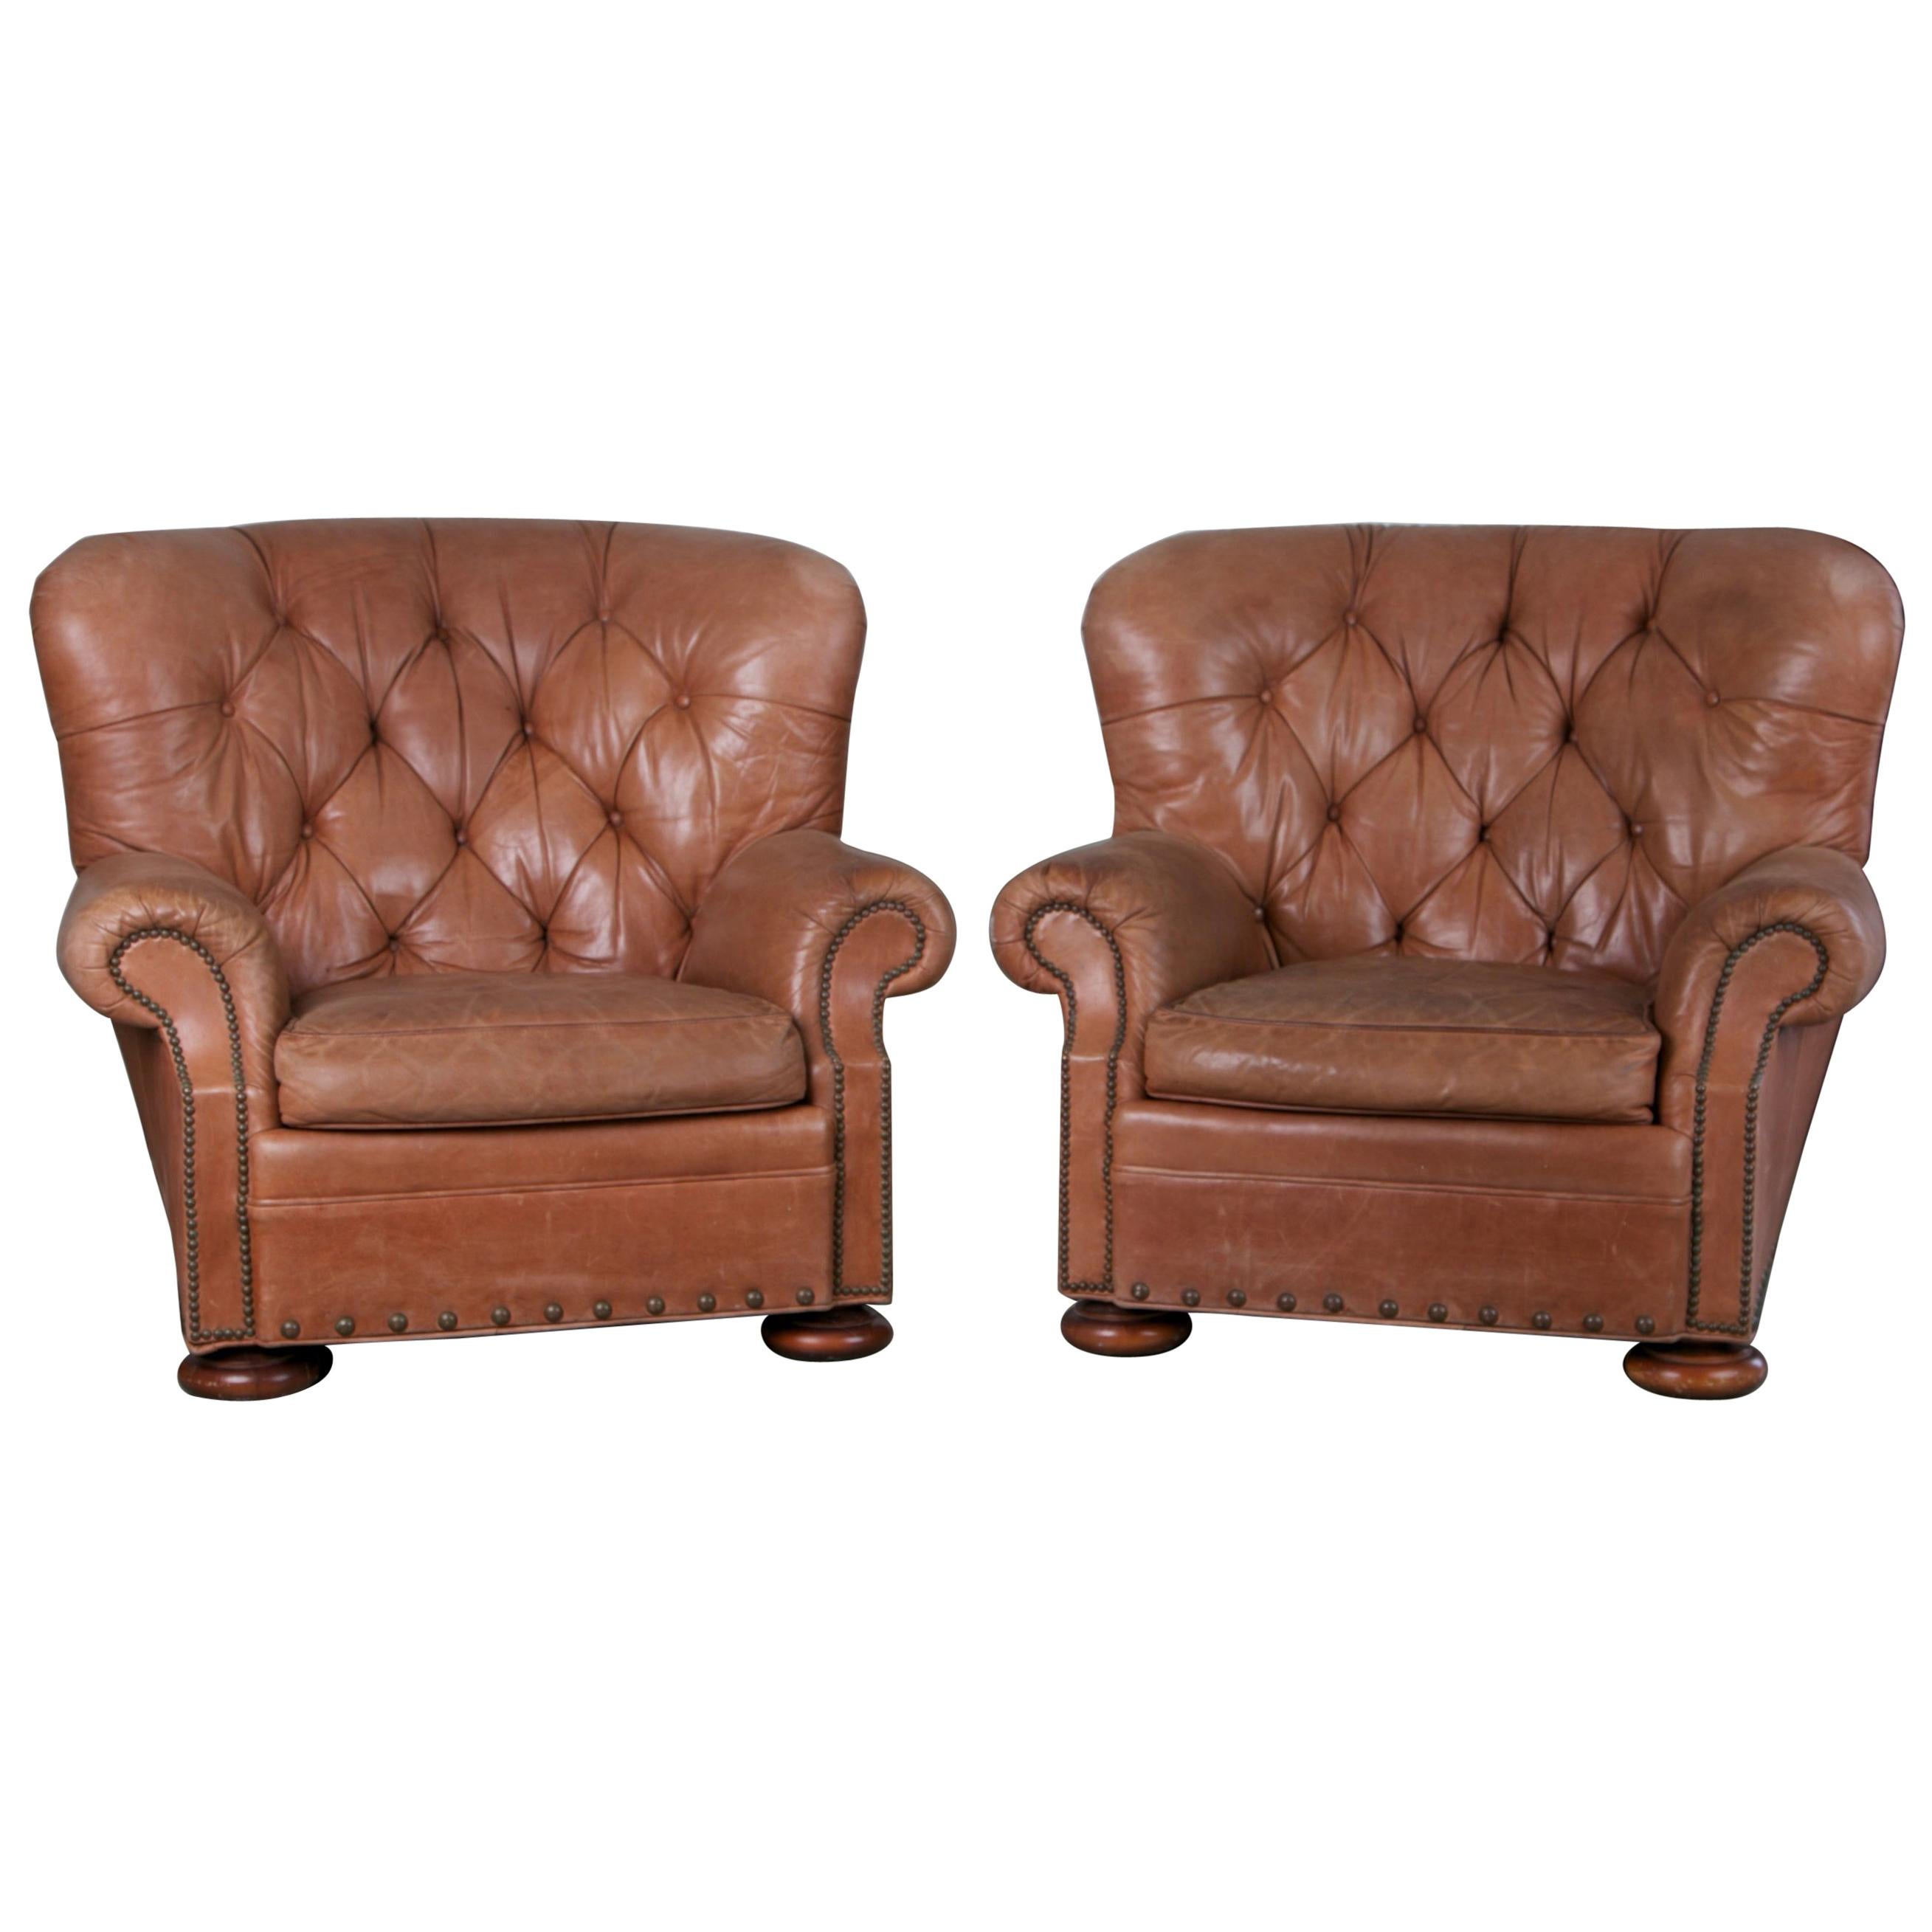 Pair of Tufted Leather Armchairs the Style of Ralph Lauren Writer's Chair